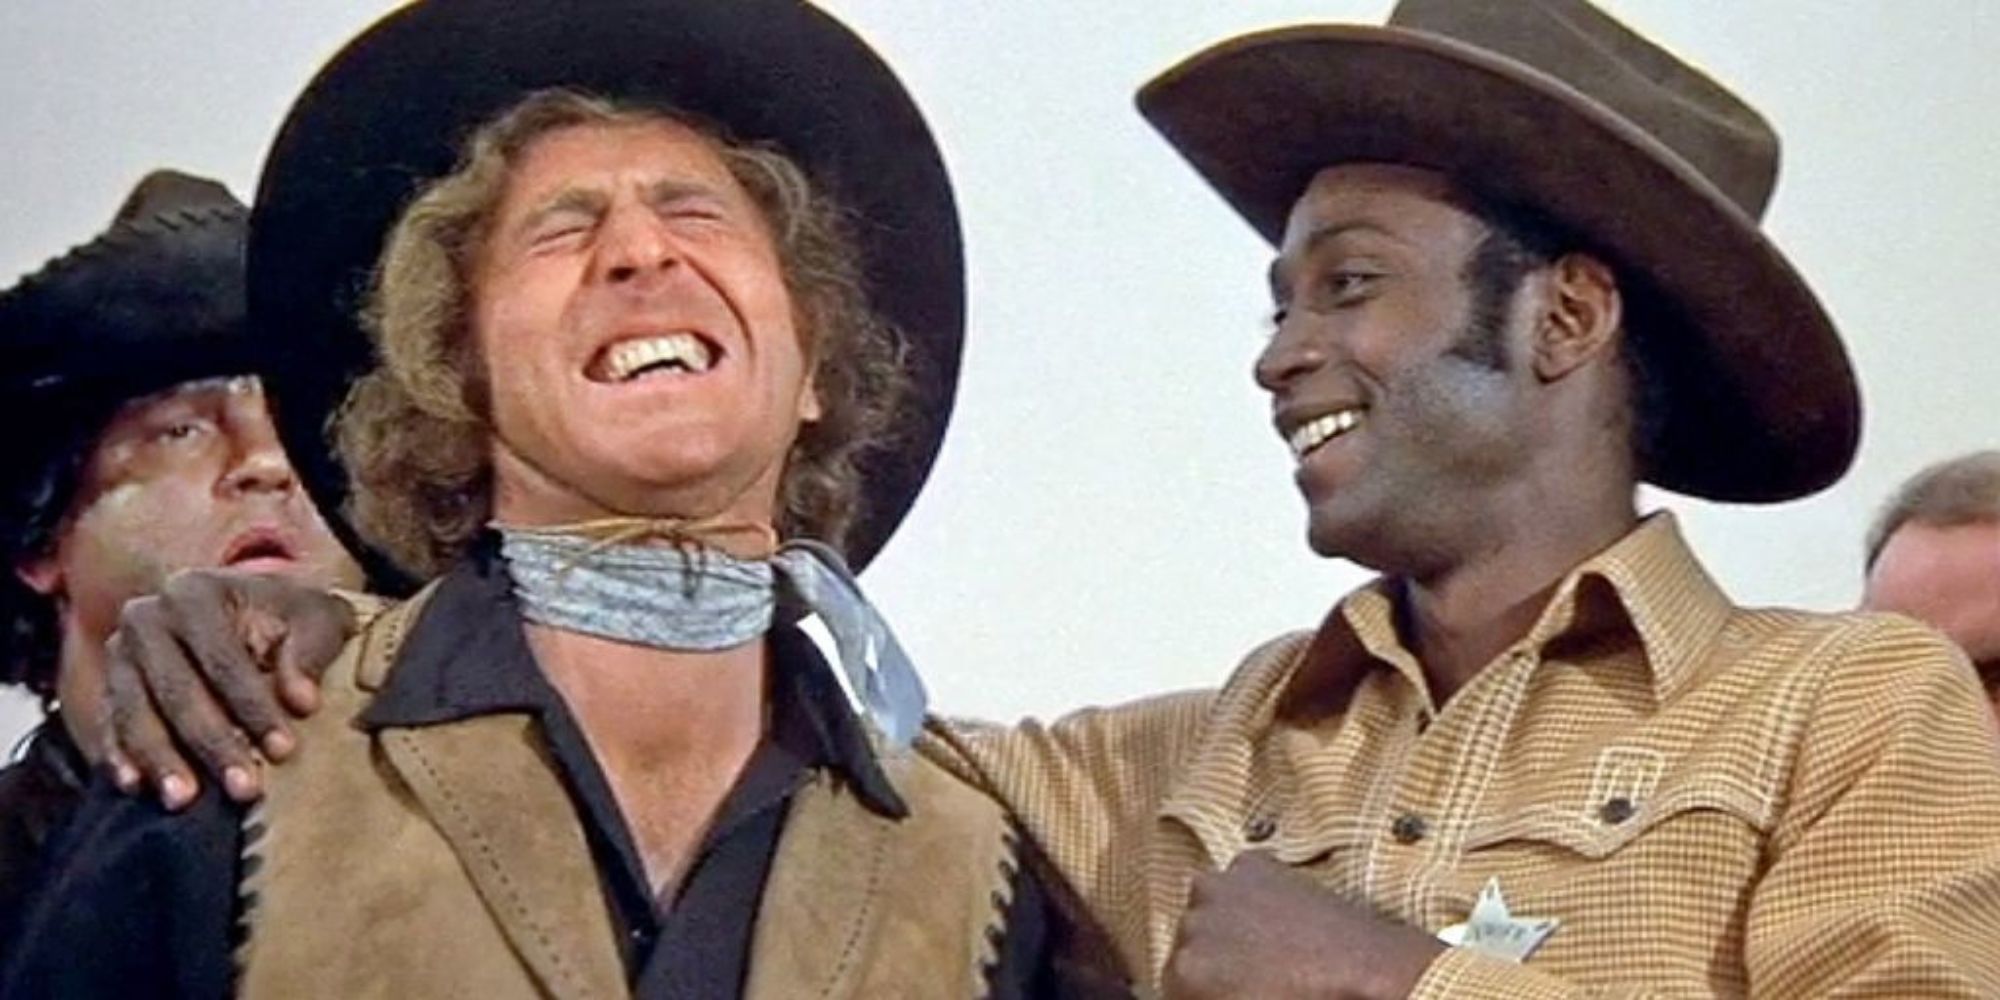 Gene Wilder and Clevon Little laughing in Blazing Saddles